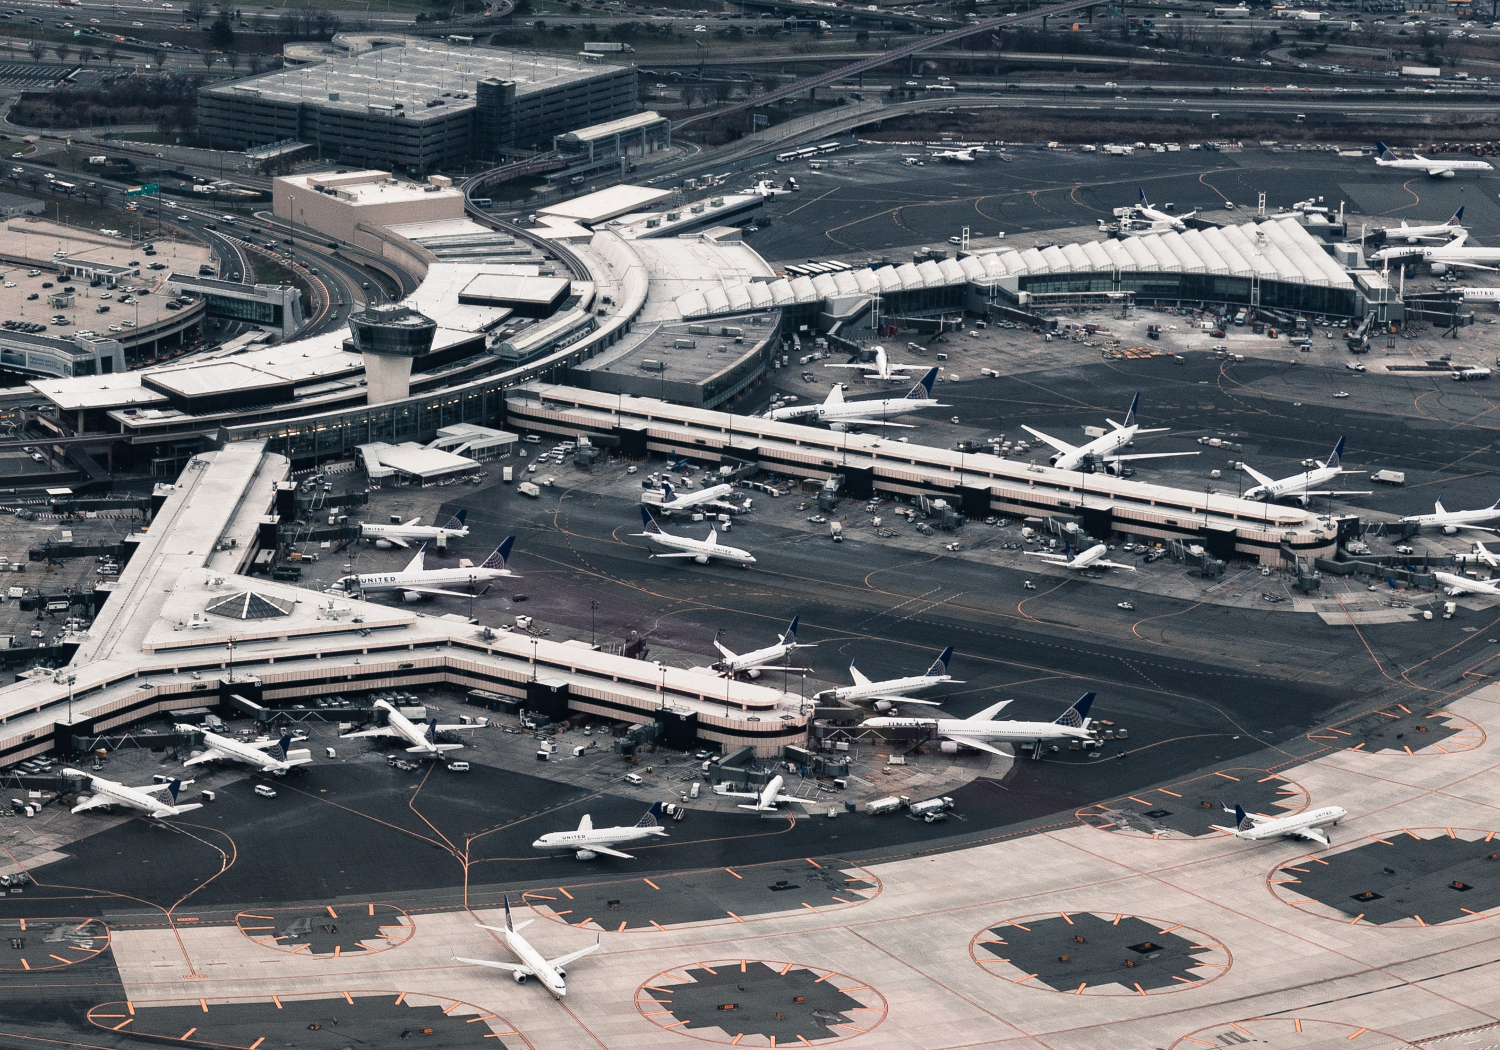 The overhead view of a busy terminal with many planes.